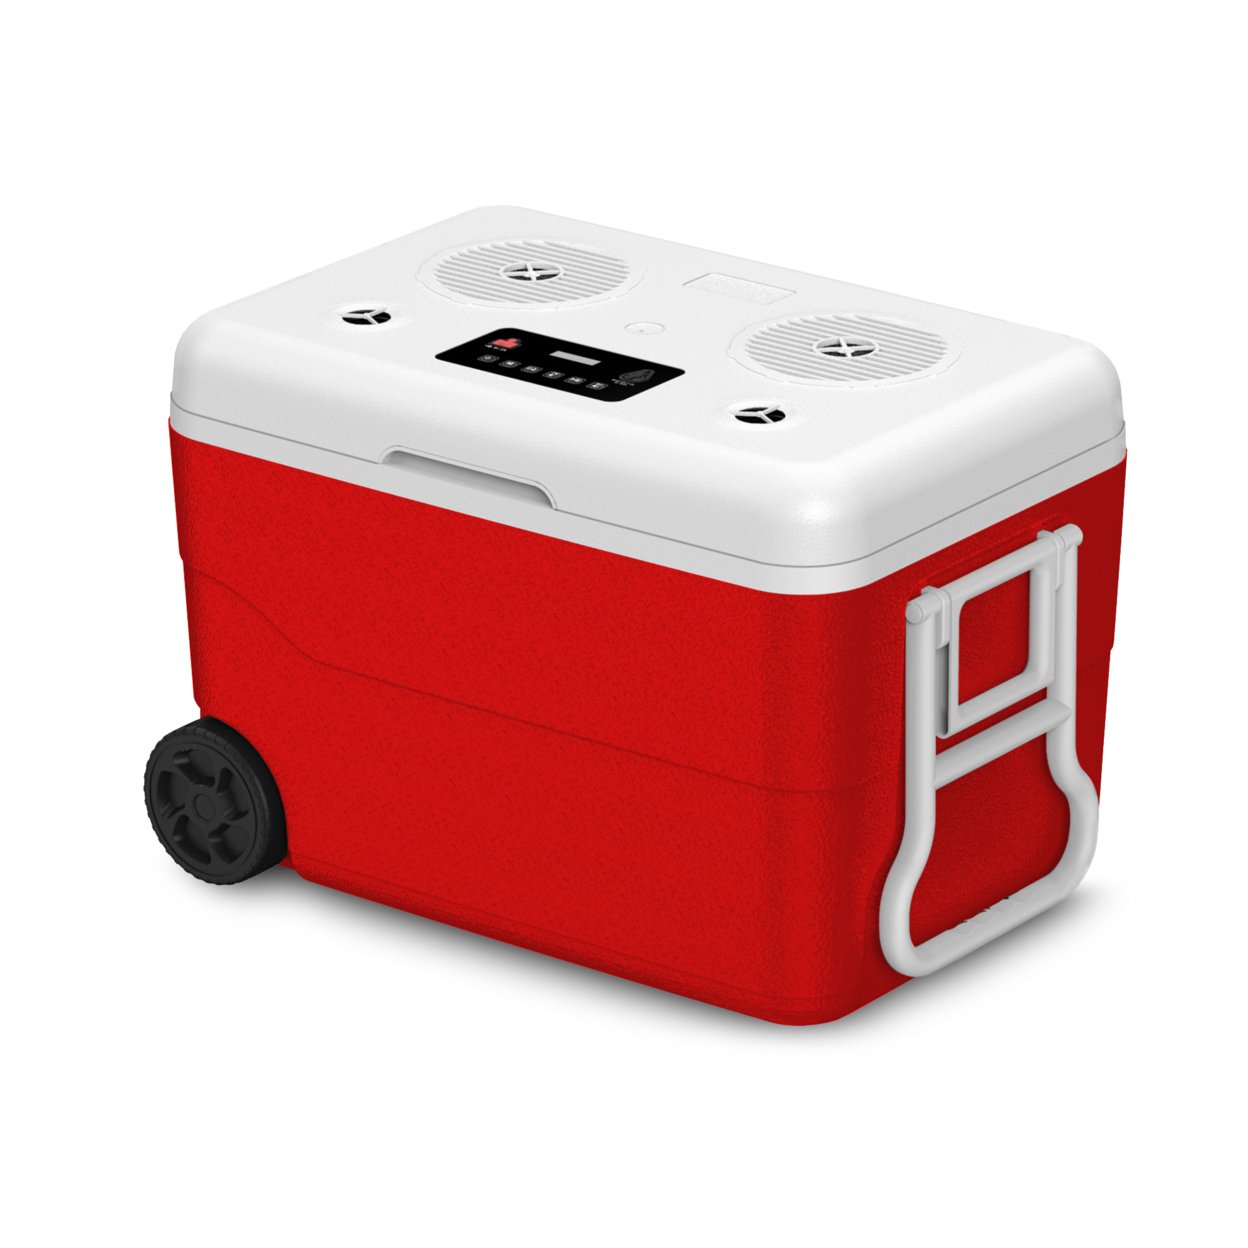 Technical Pro Rechargeable Red 55 Quarts Cooler With Waterproof Built-in Bluetooth Speaker And 12,000 MaH Power Bank, Great For Picnics